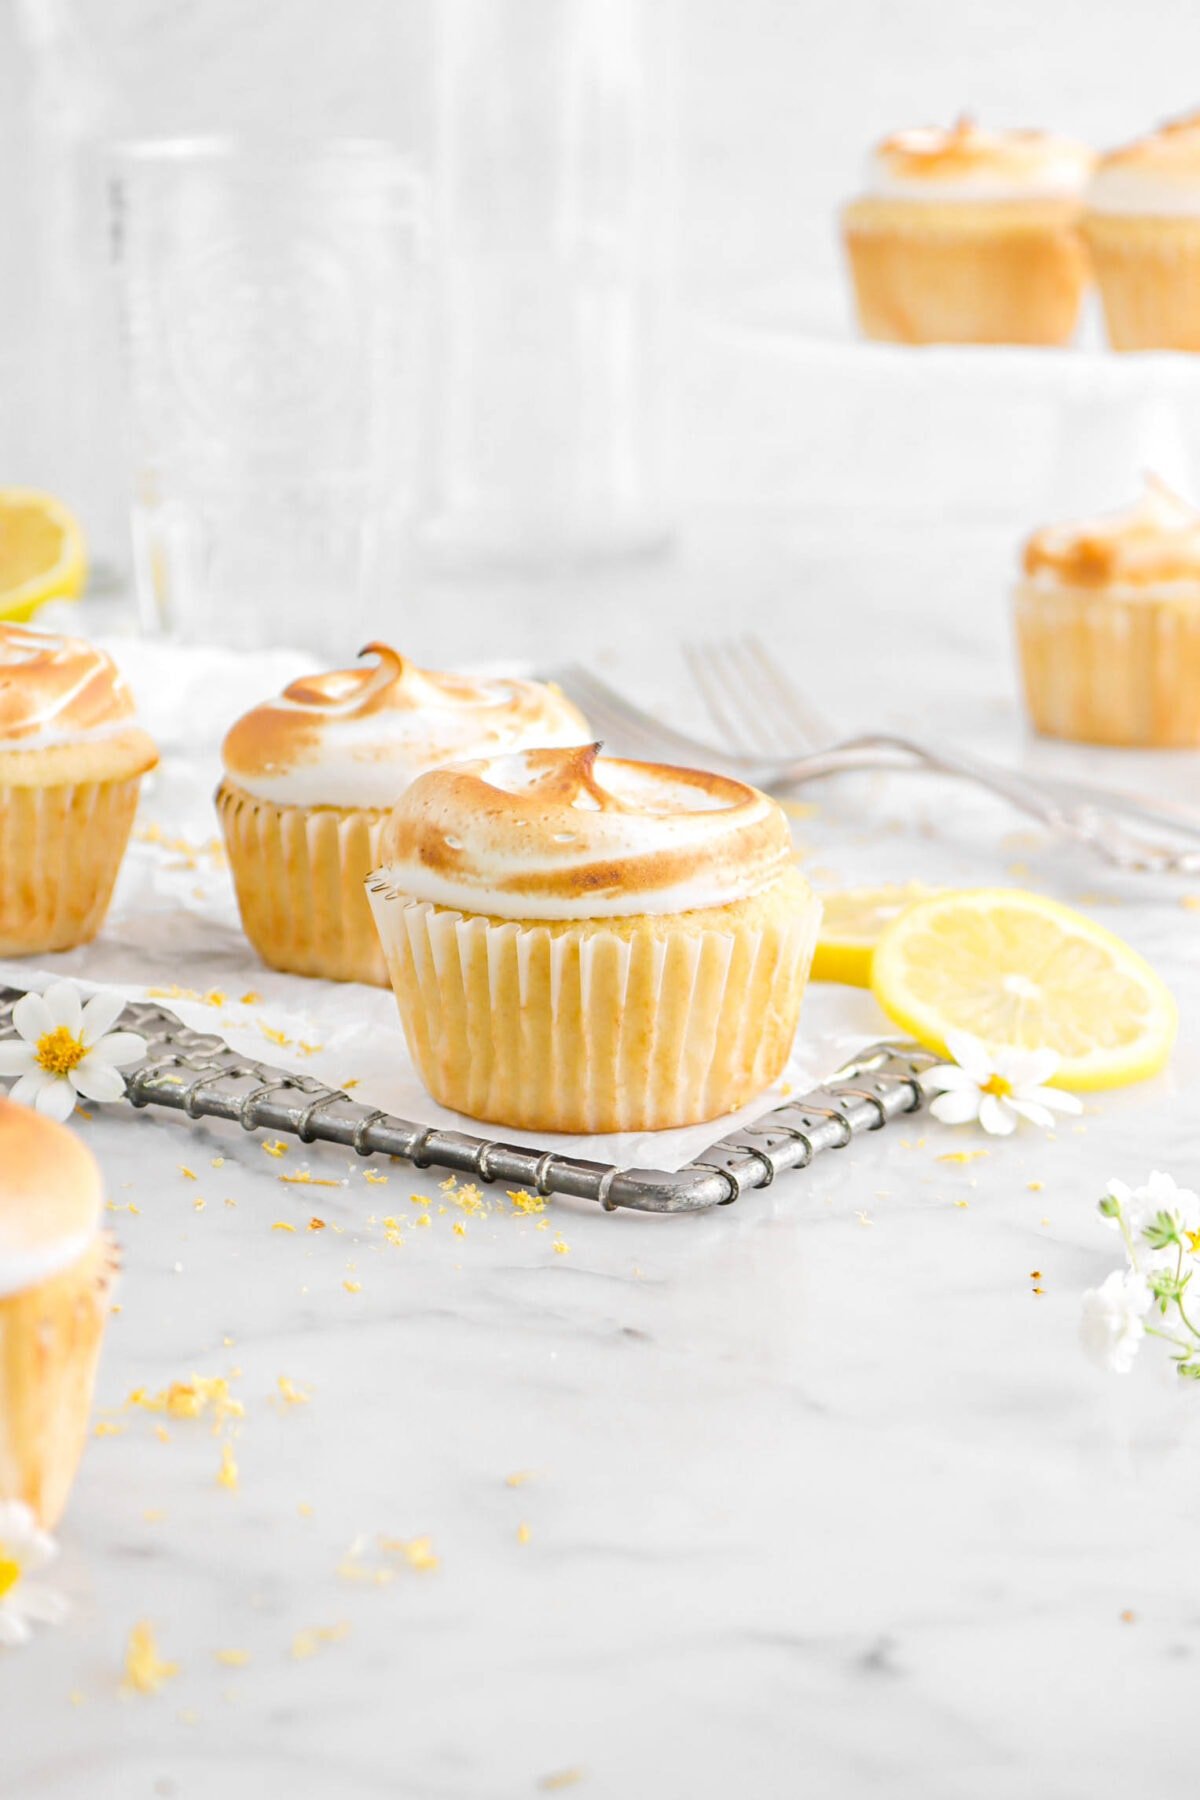 lemon meringue cupcakes on wire rack with two slices of lemon, two forks, and more cupcakes behind